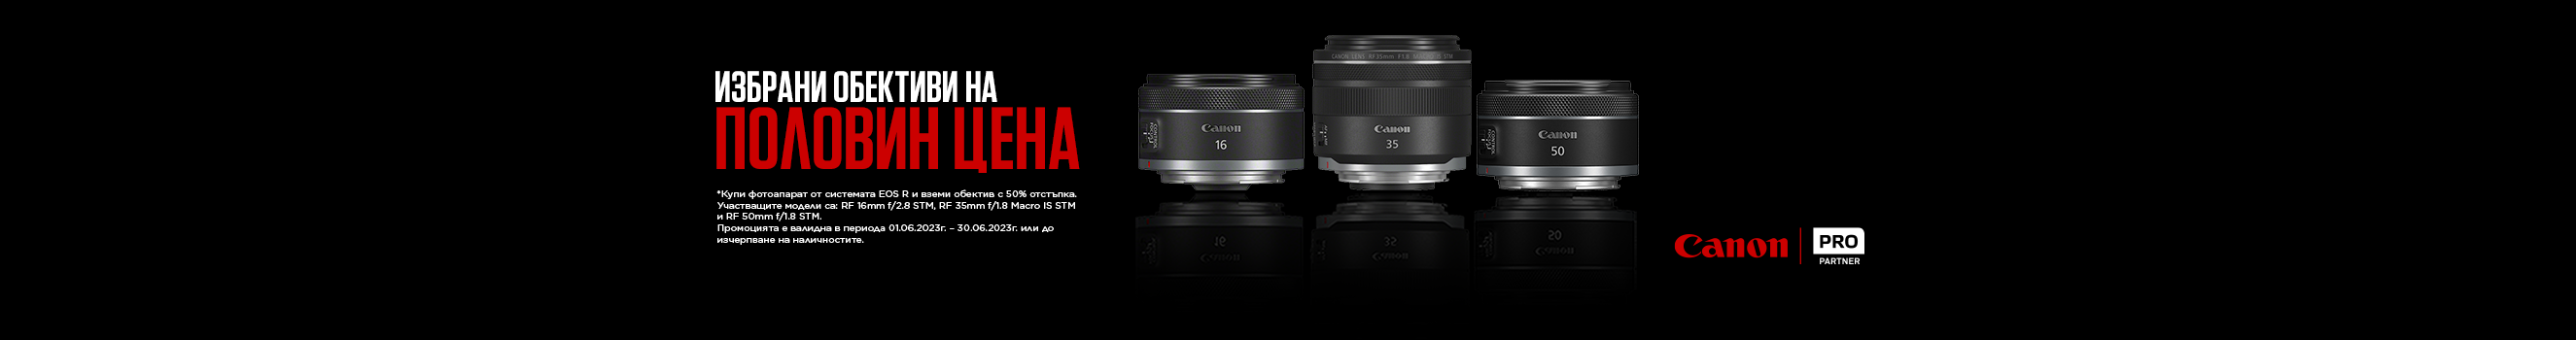  Canon EOS R Cameras + Lens Bundles at Special Prices at PhotoSynthesis store until 30.06.2023.